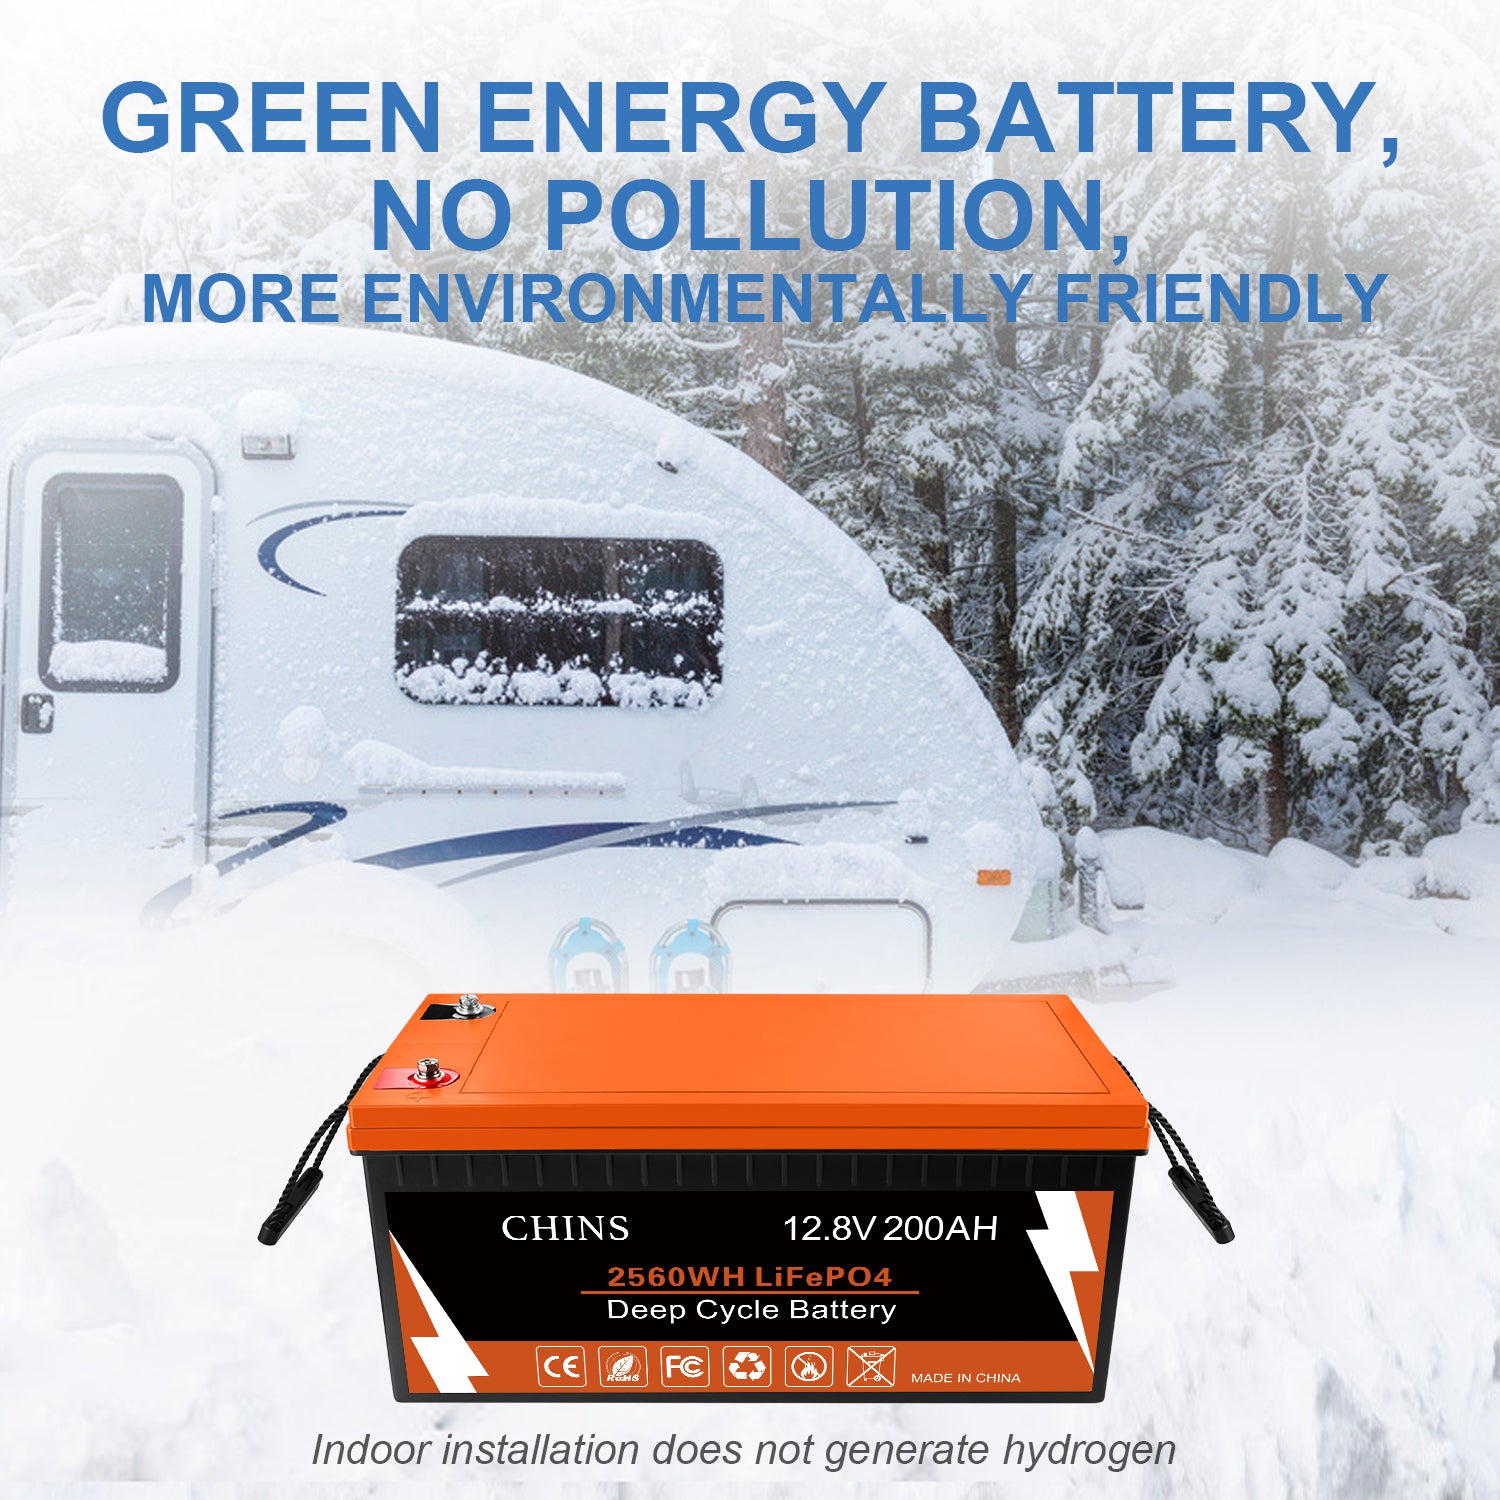 CHINS Smart 12.8V 200Ah LiFePO4 Lithium Battery, Support Low